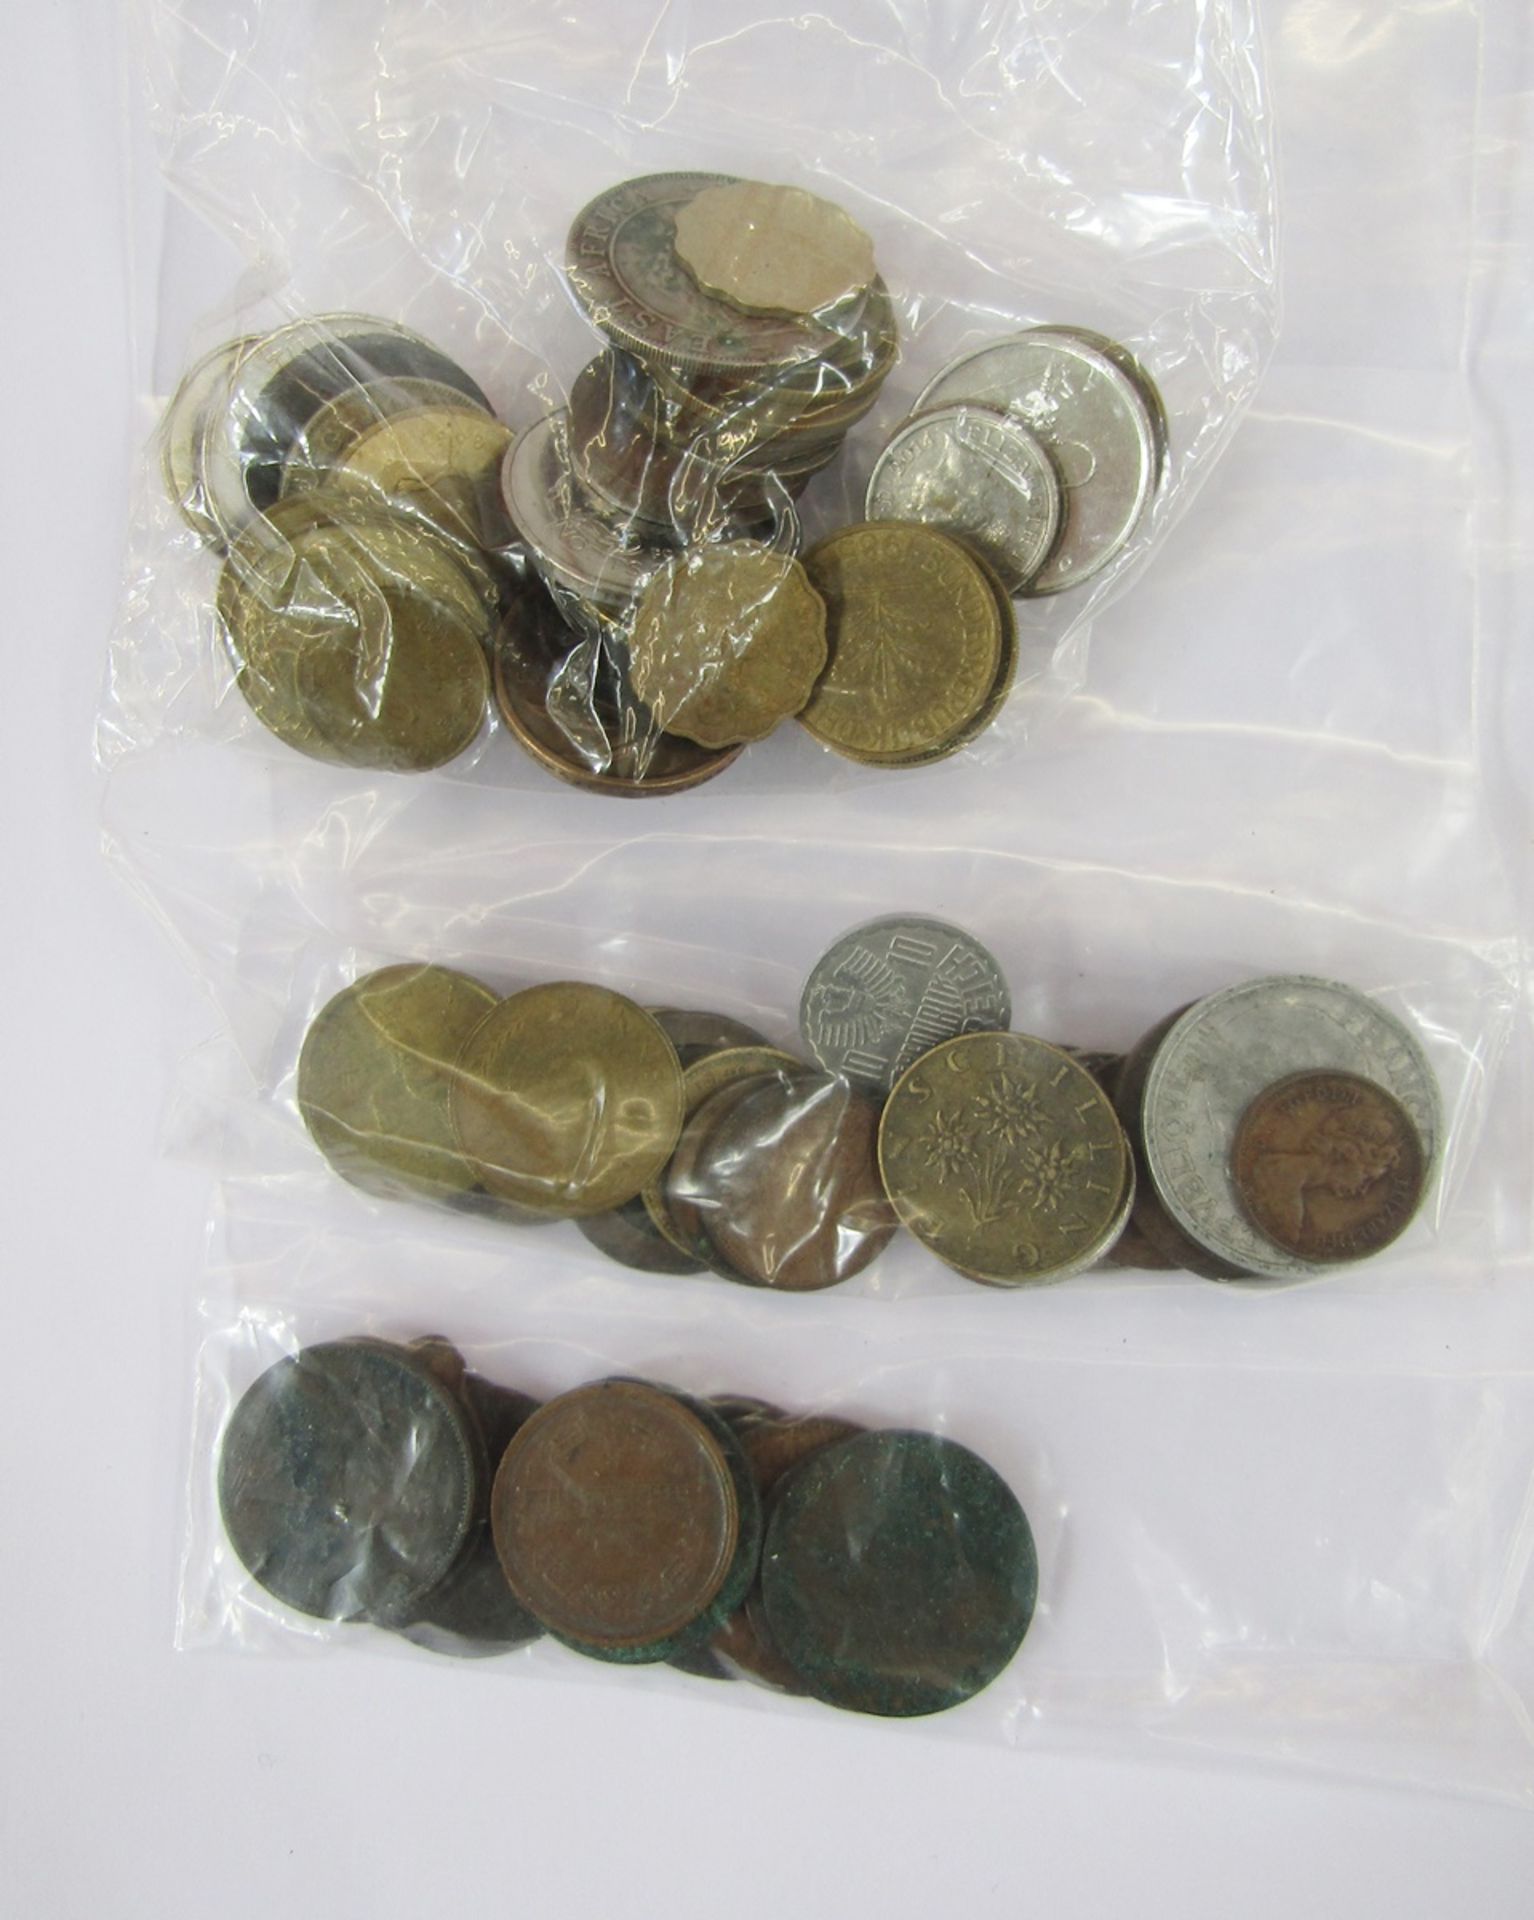 Group of coins, some commemorative crowns, £2 and 50p together with some world coins. - Image 5 of 6